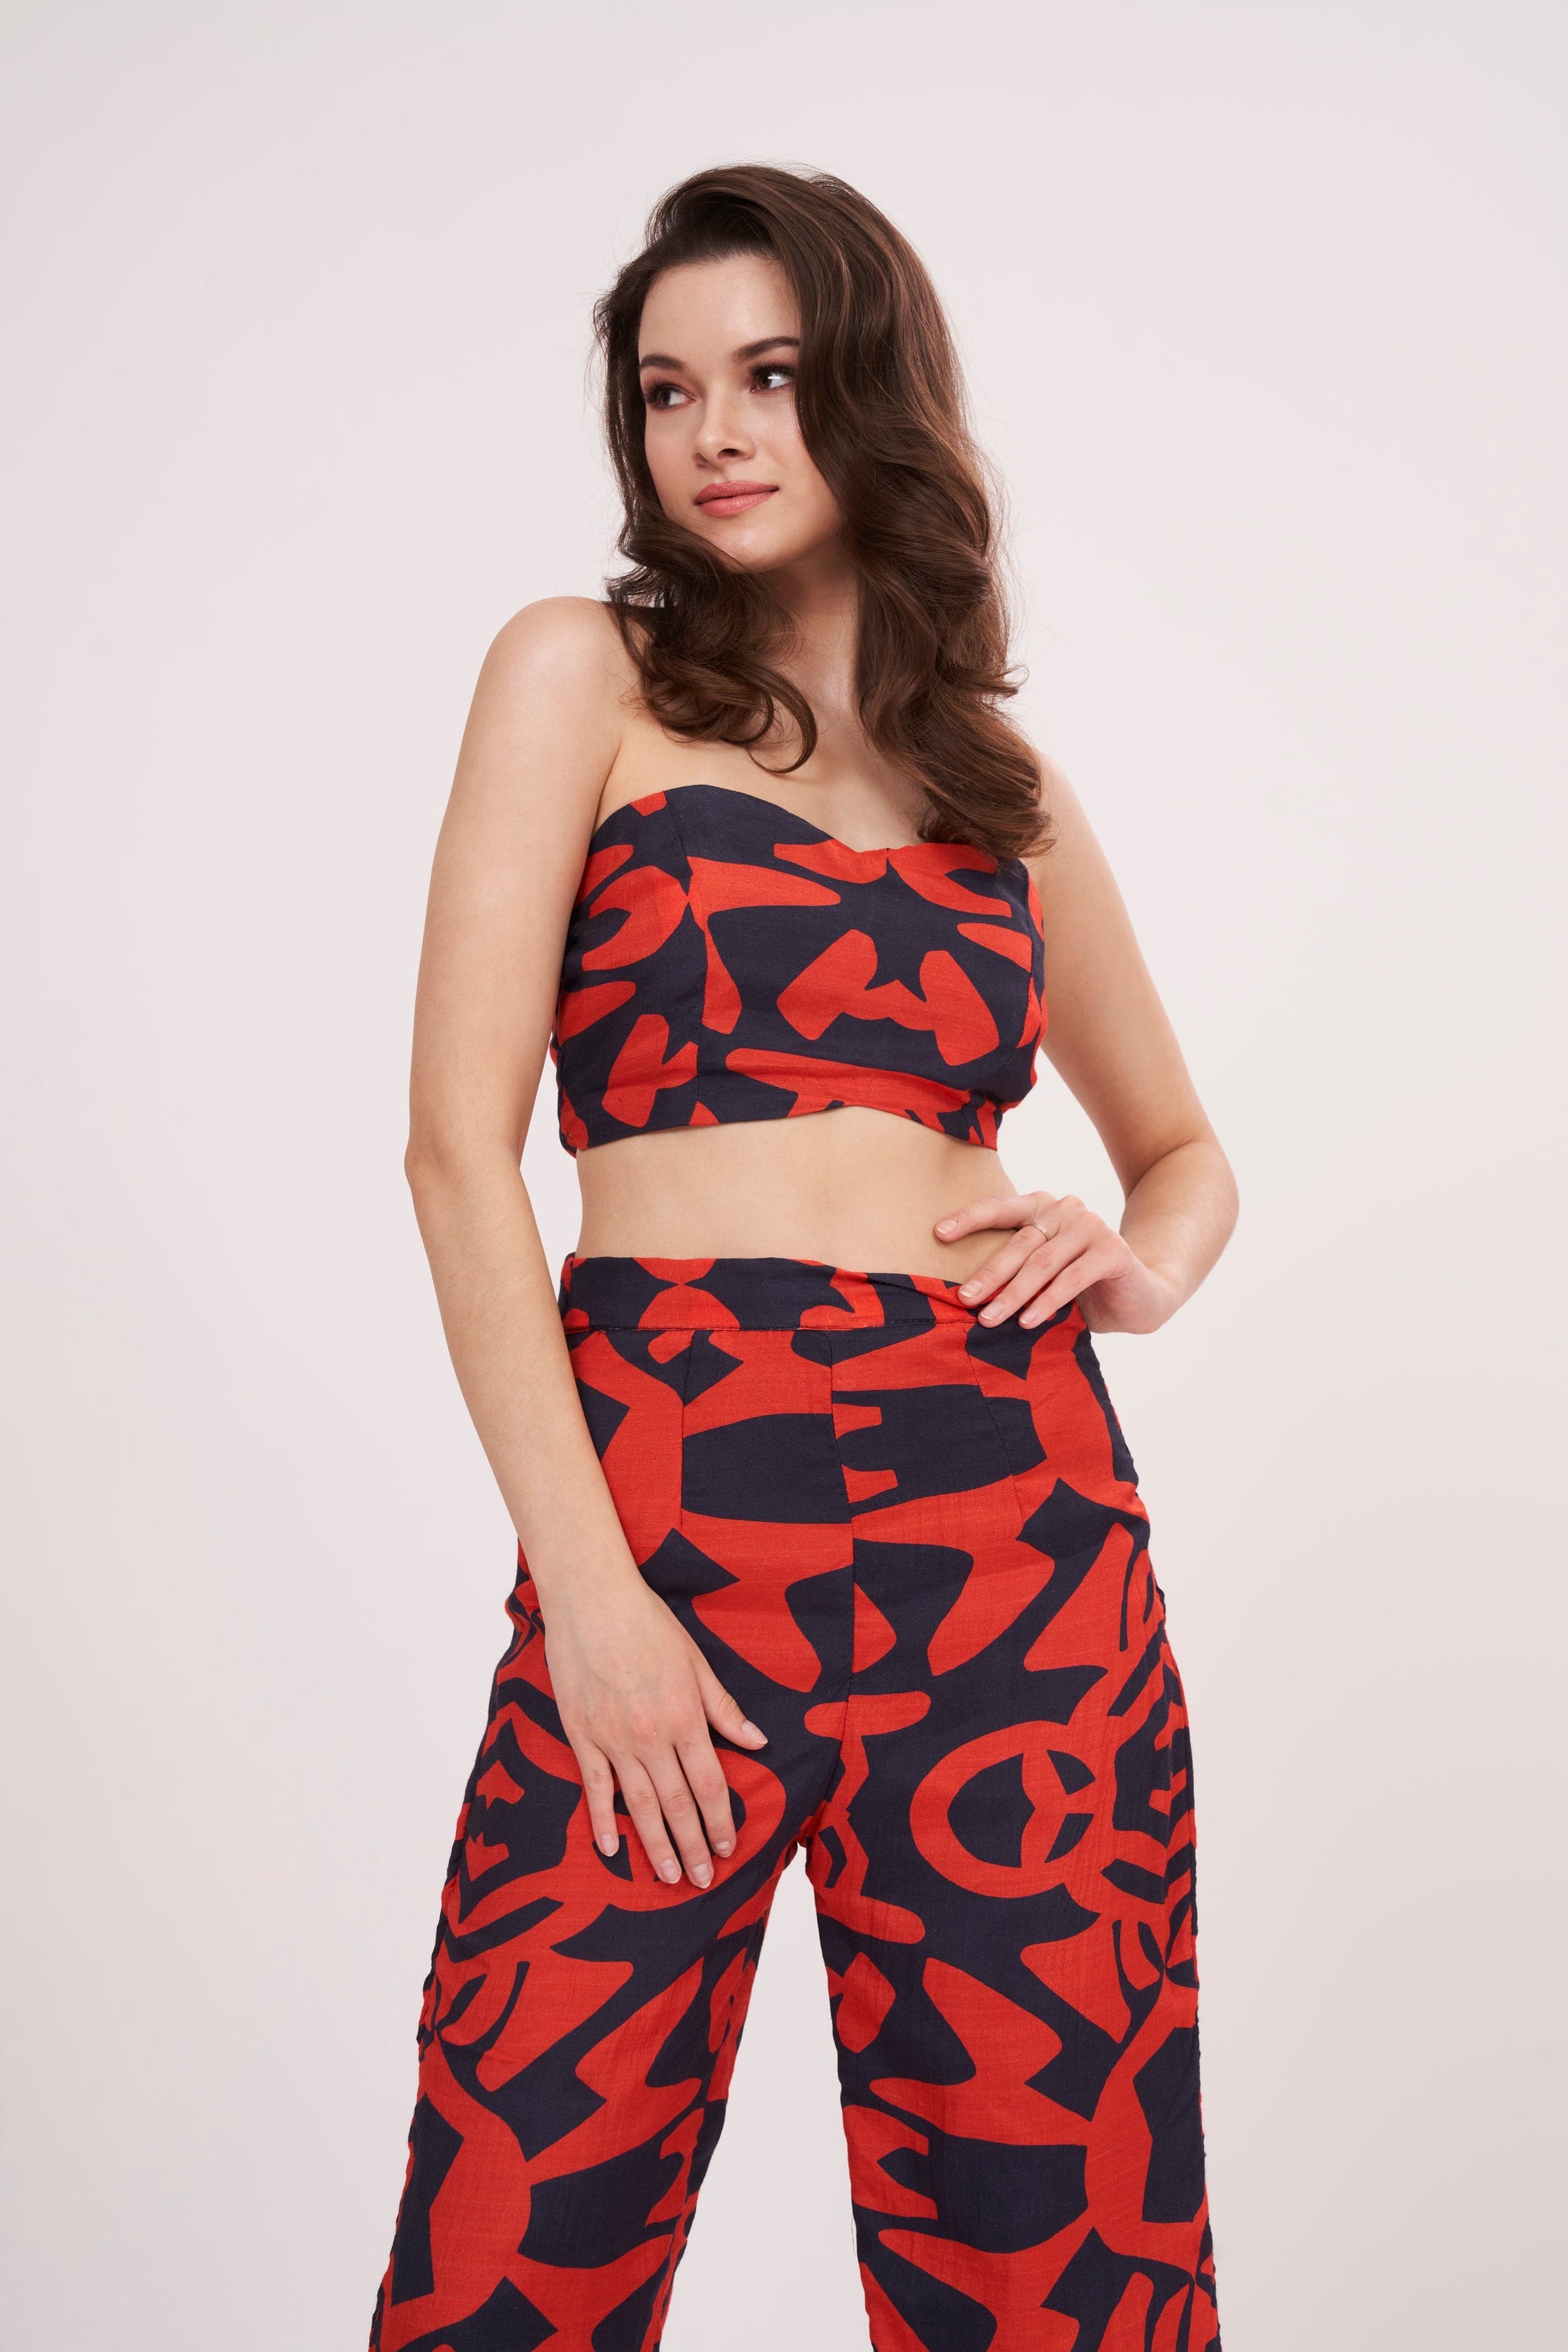 Stylish and comfortable parallel trousers with bold geometric design, crafted from premium muslin fabric, featuring a roomy, flowy silhouette and vibrant colors.